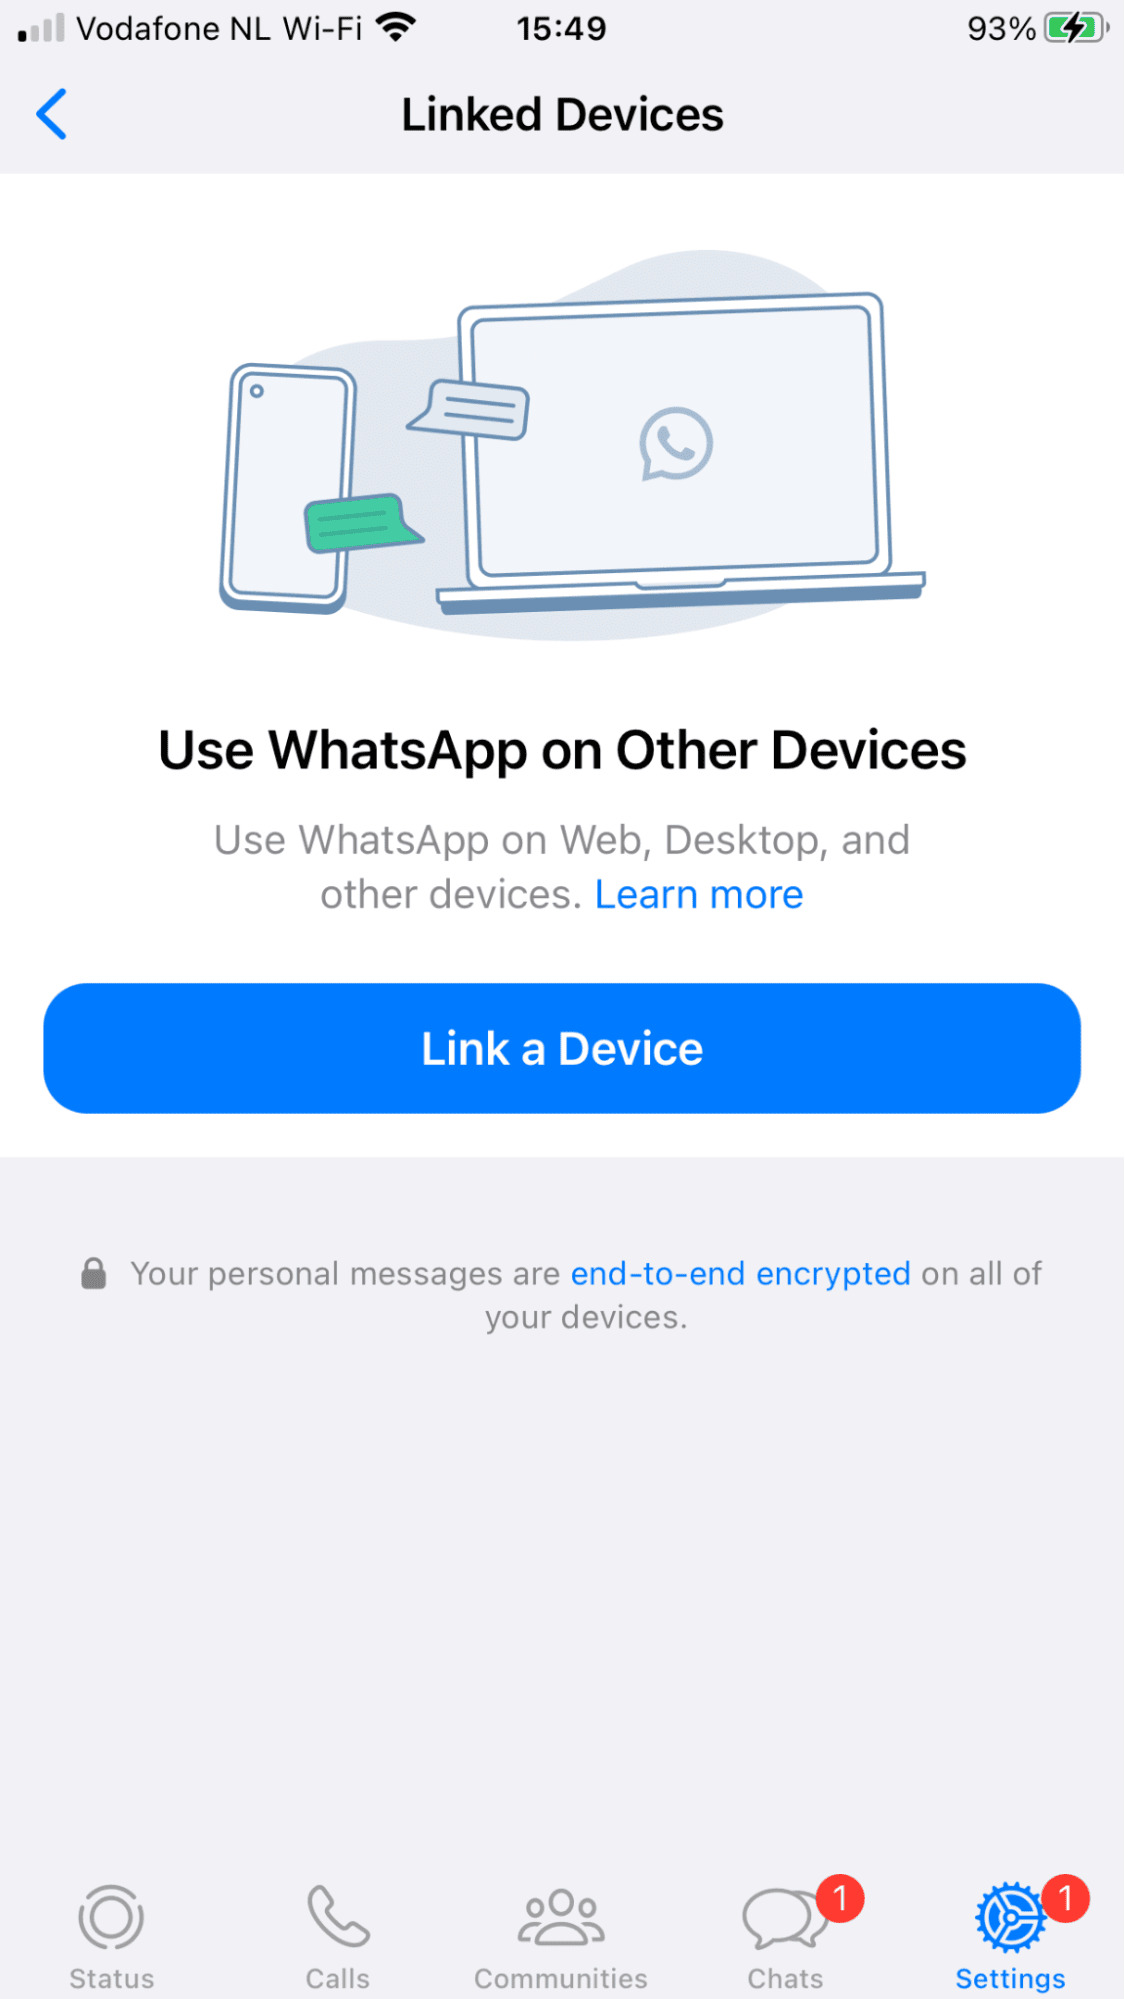 Can I use WhatsApp to transfer videos and photos?